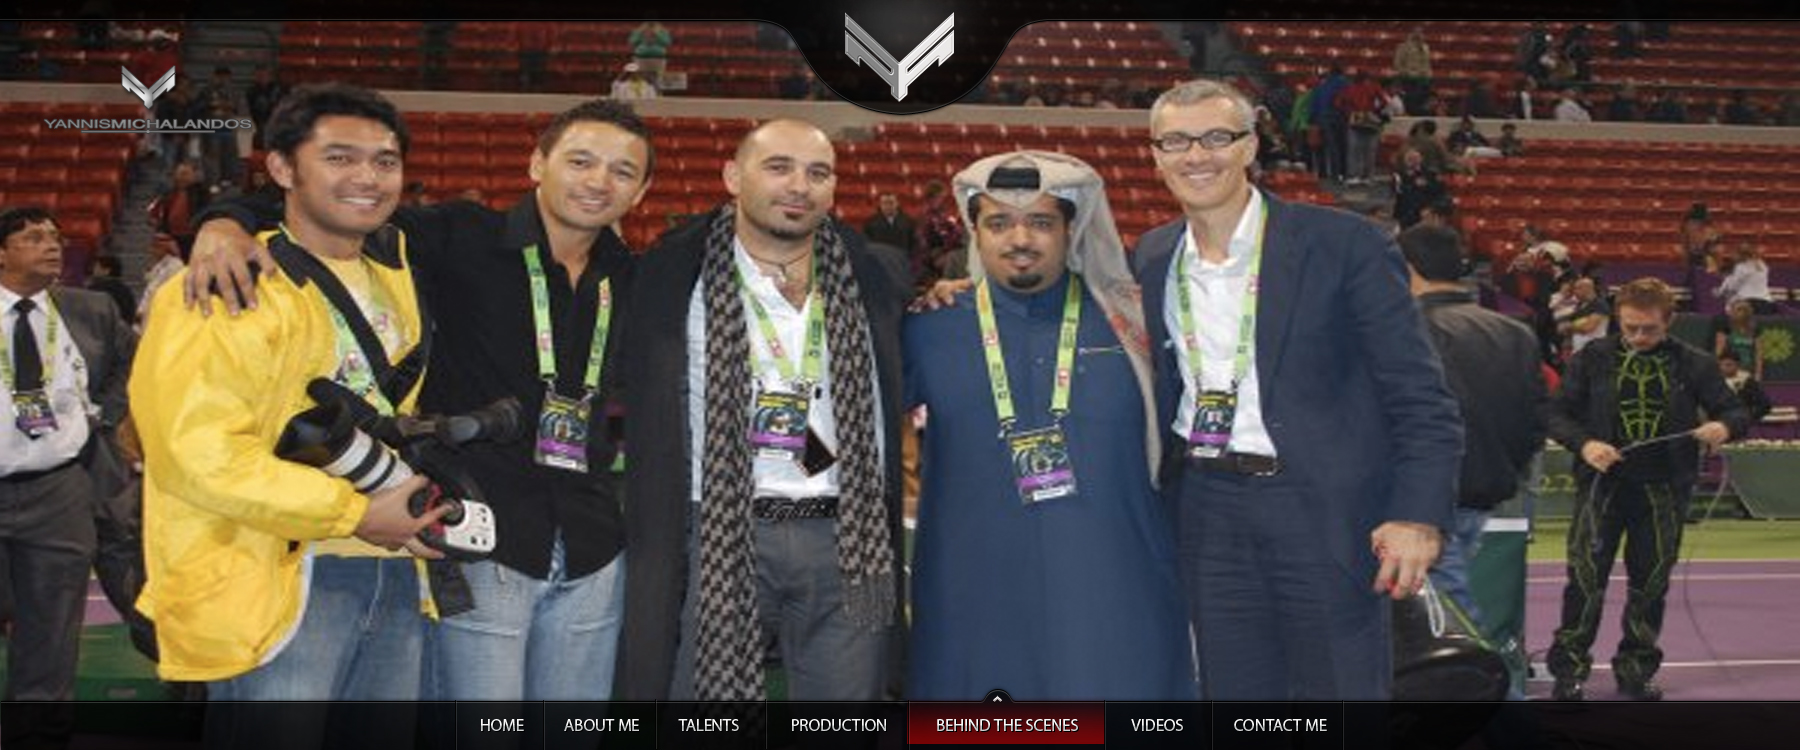 Behind The Scenes with Team during Sony Ericsson Championship